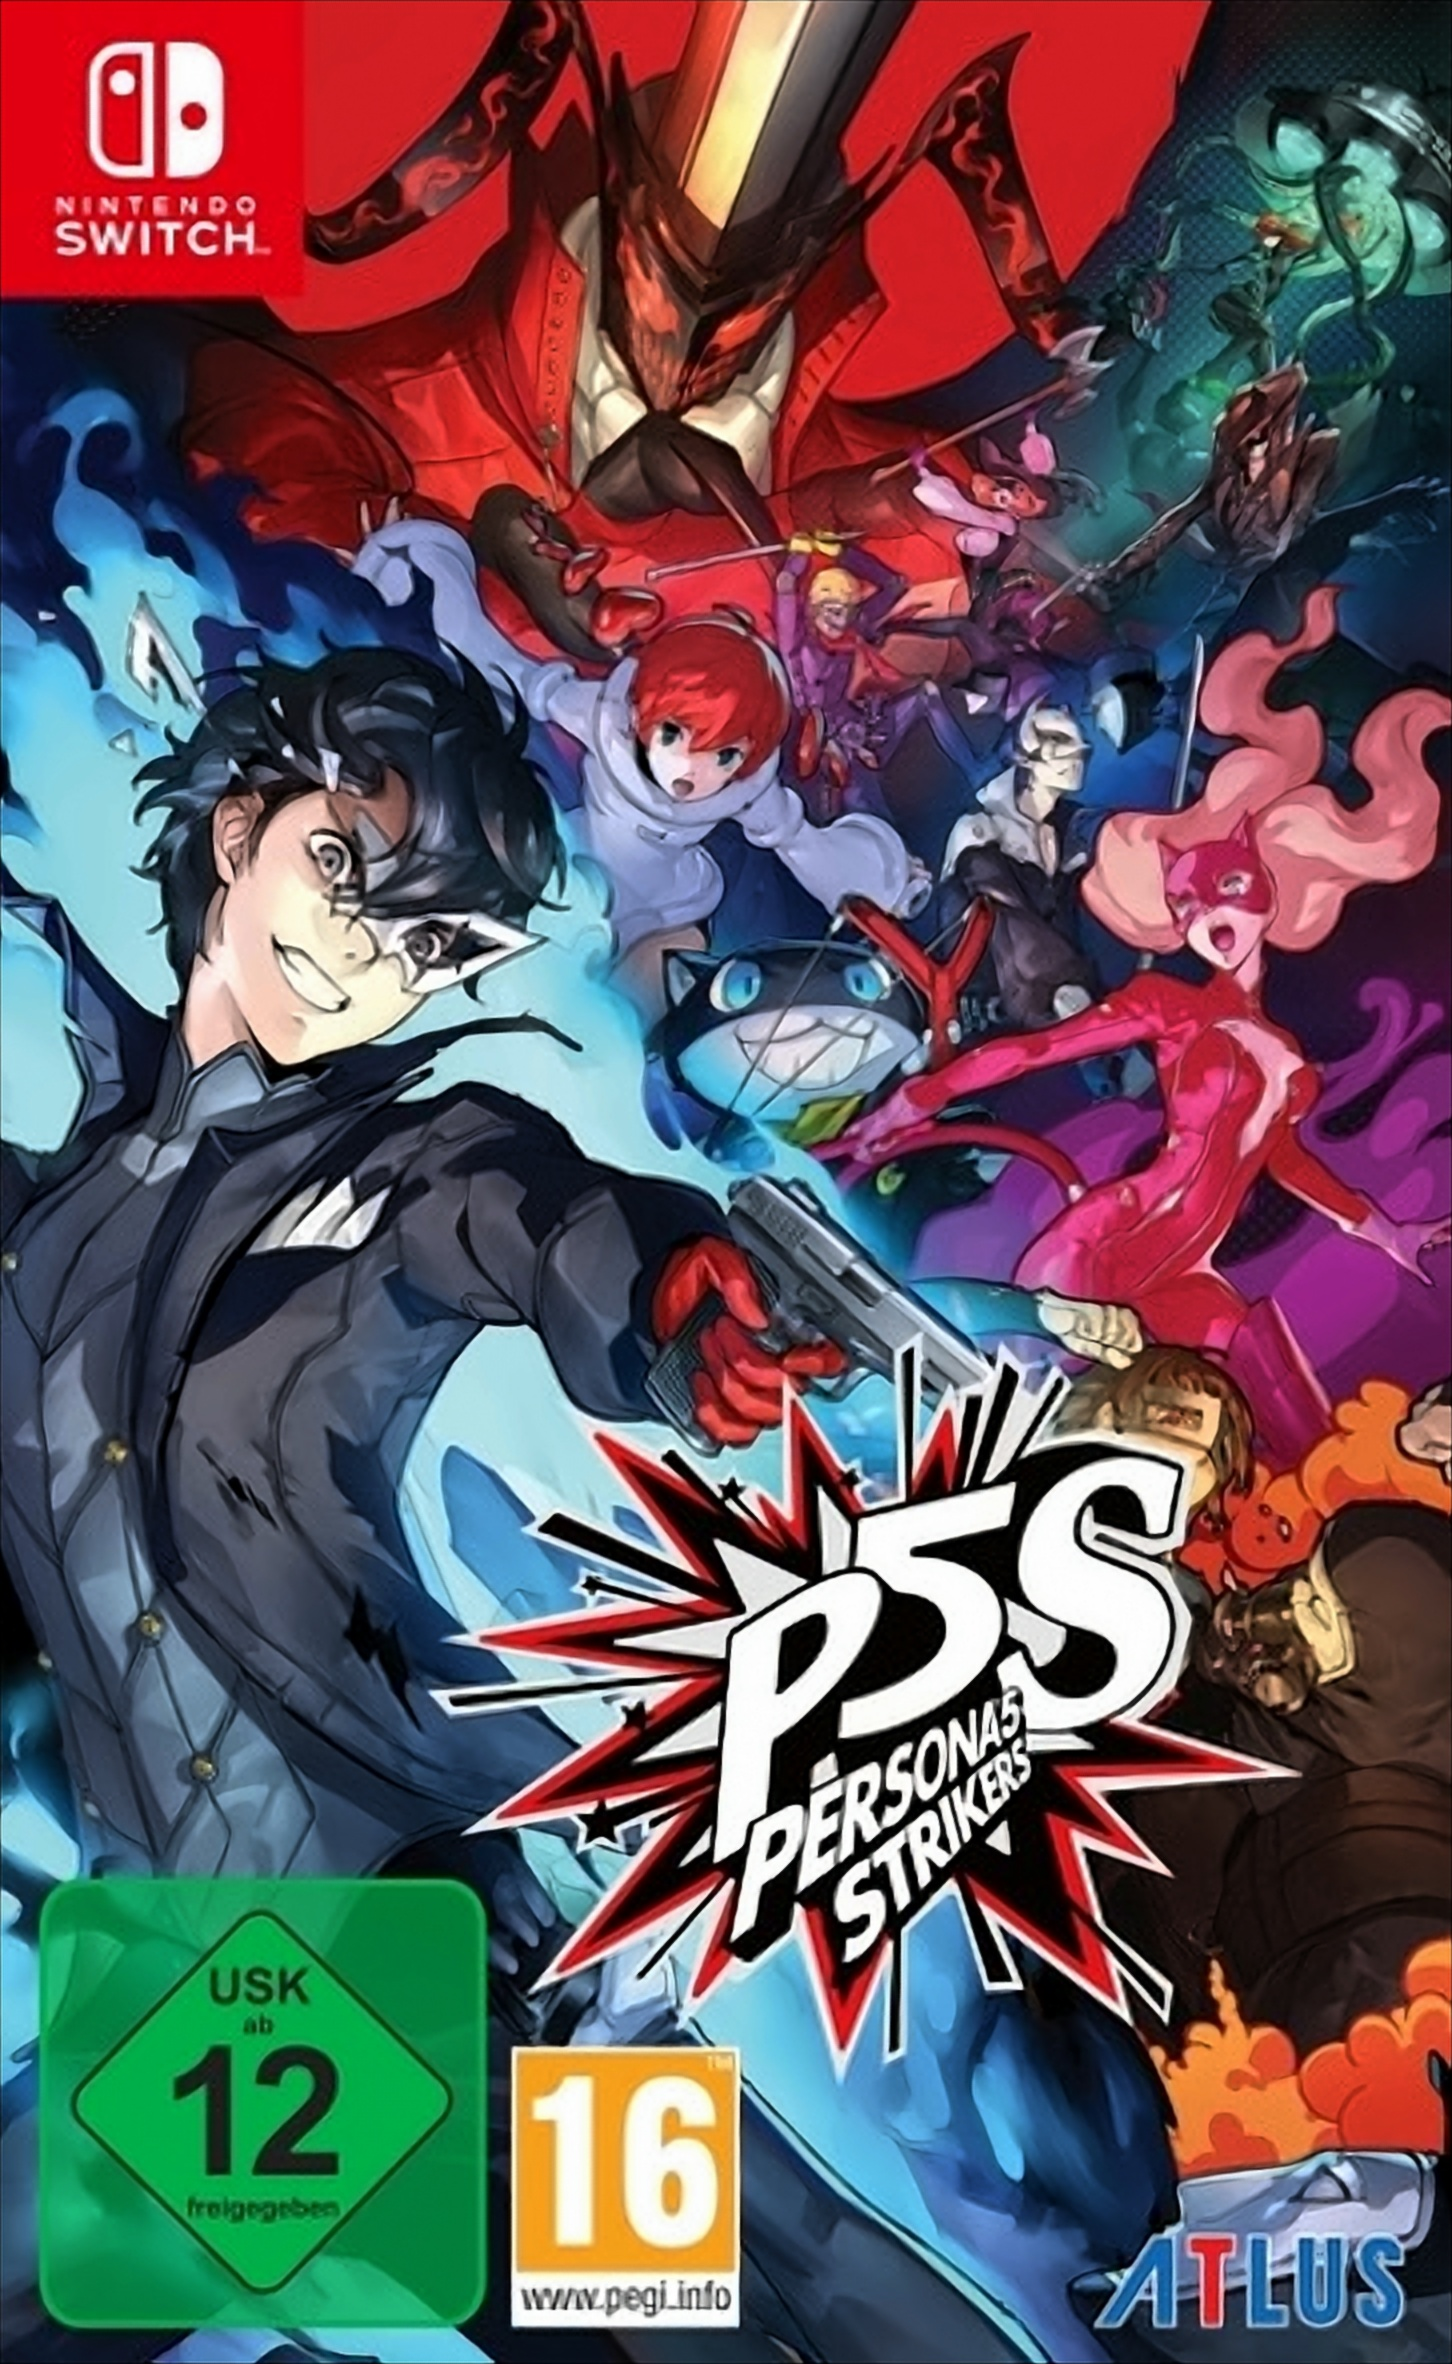 Edition Limited - Persona 5 Switch] [Nintendo Strikers